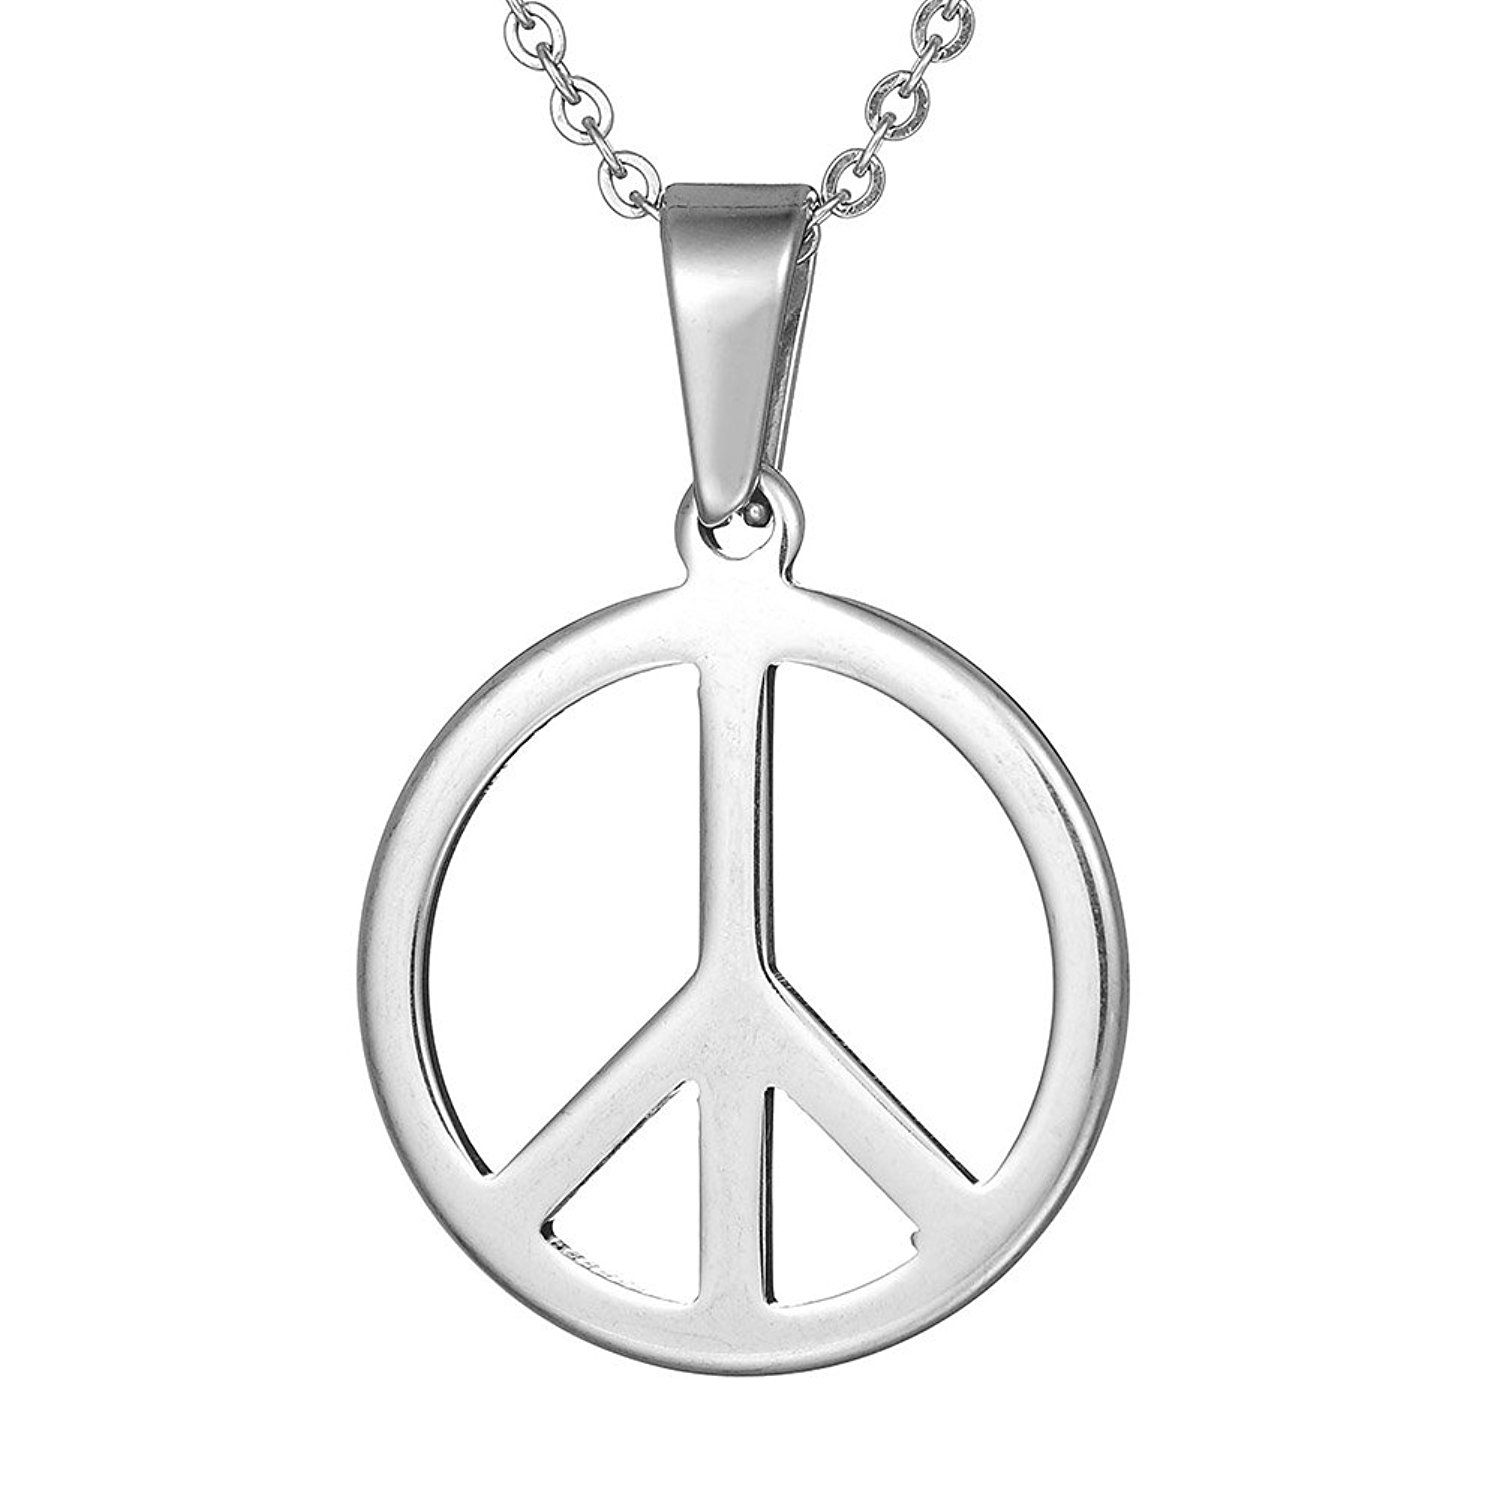 Davitu Wholesale 10pcs Hippie Stainless Steel Peace Sign Charm Pendant Necklace for Men Steel Jewelry ST035 Metal Color: only Pendant